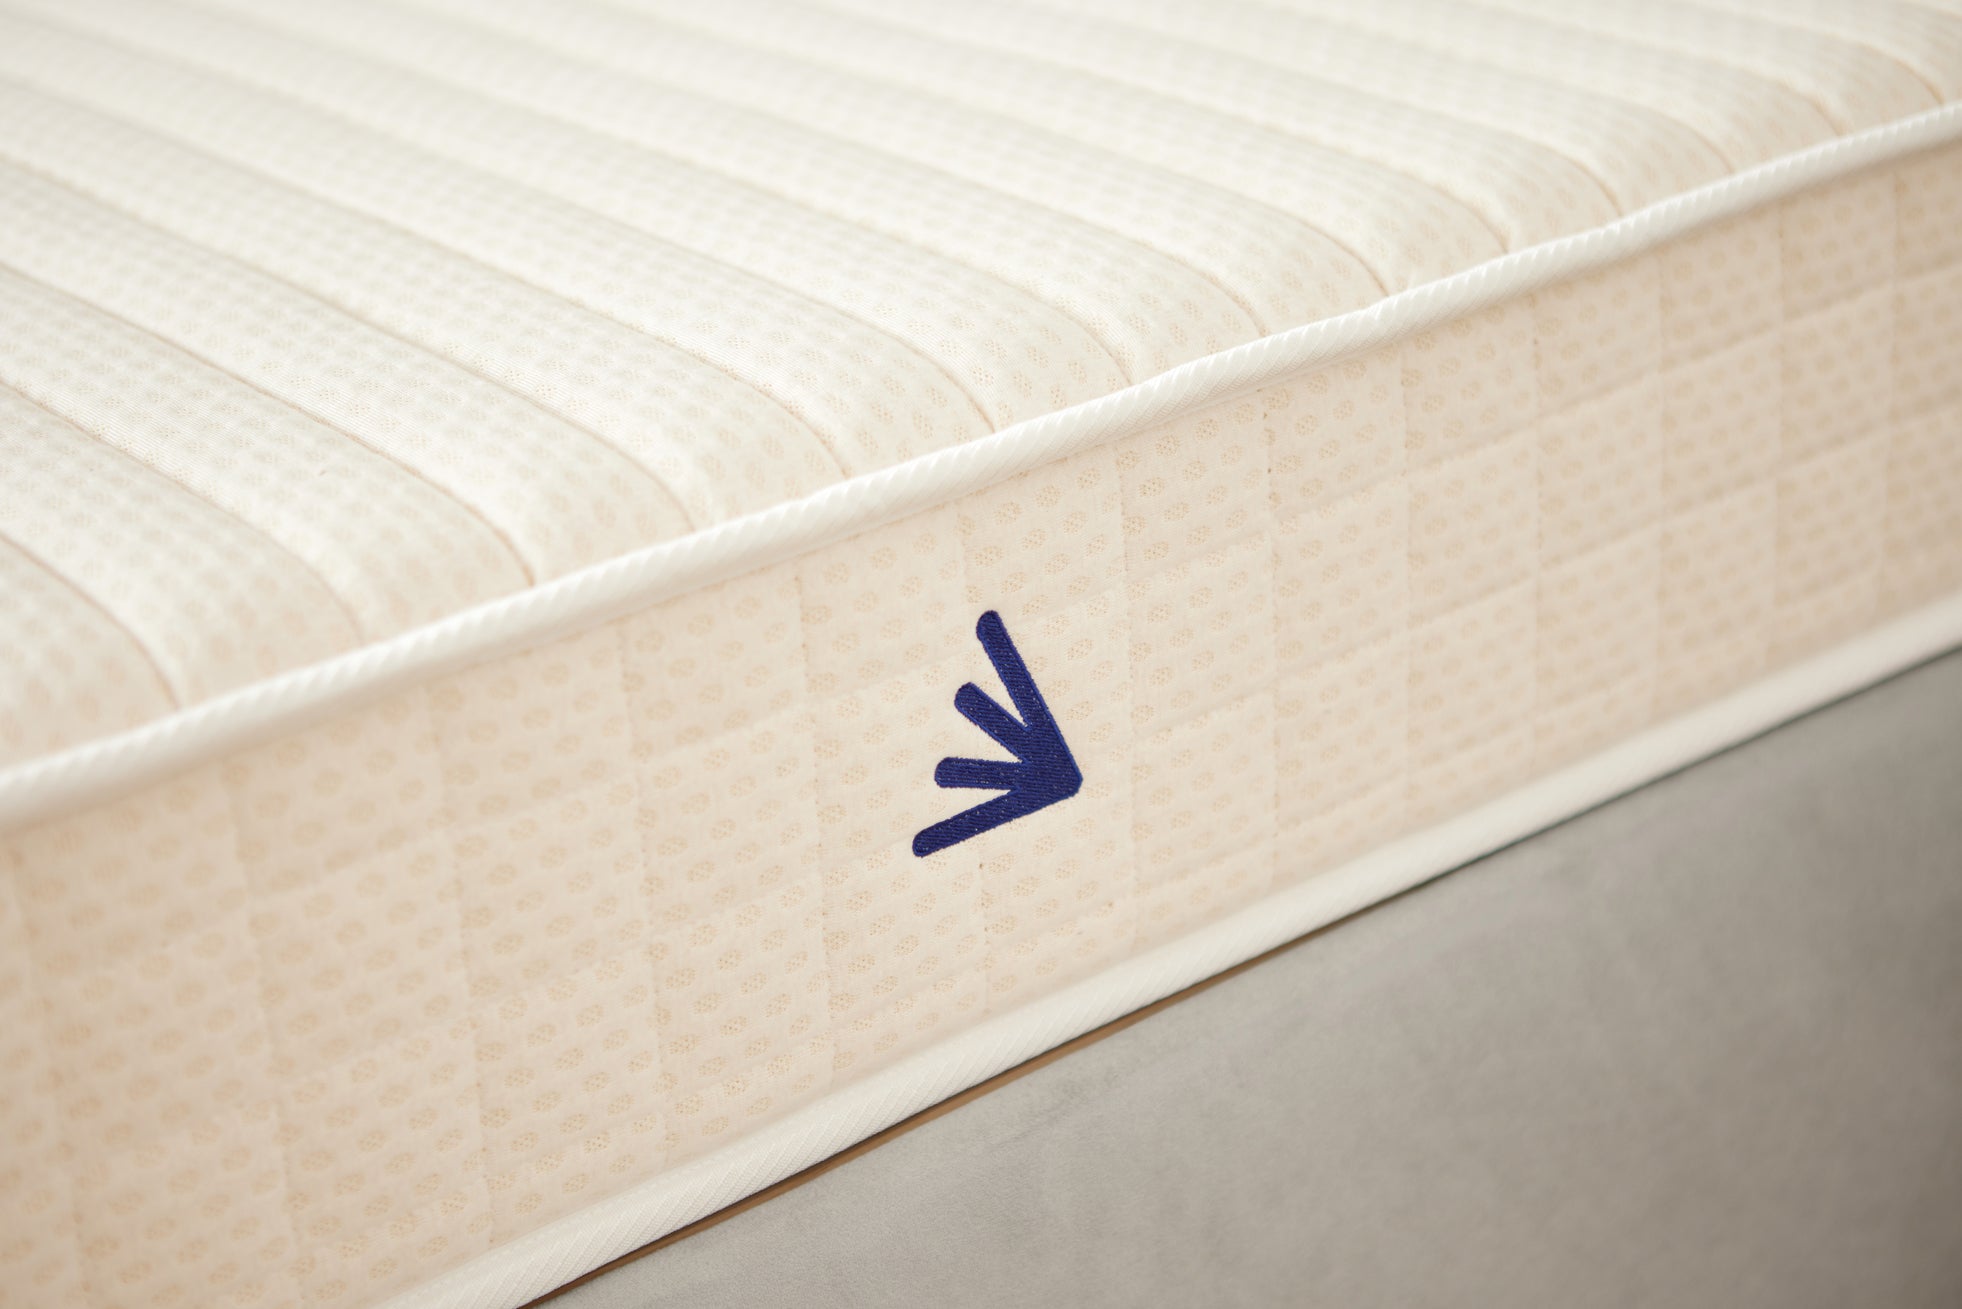 Adjustable Beds Mattress Branding by The Natural Sleep Company